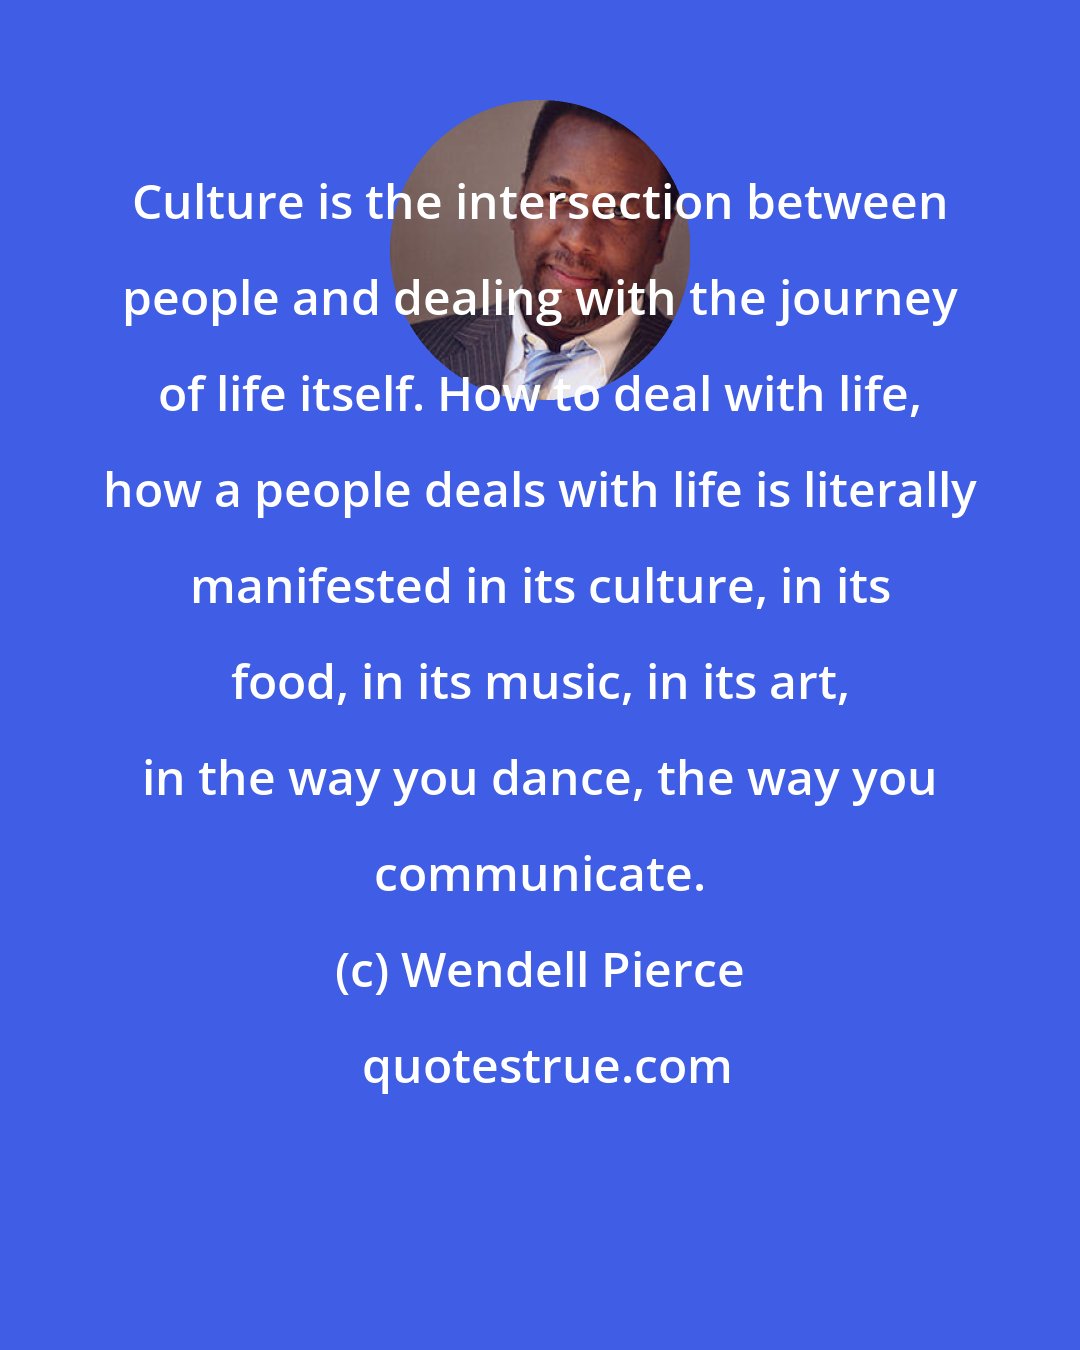 Wendell Pierce: Culture is the intersection between people and dealing with the journey of life itself. How to deal with life, how a people deals with life is literally manifested in its culture, in its food, in its music, in its art, in the way you dance, the way you communicate.